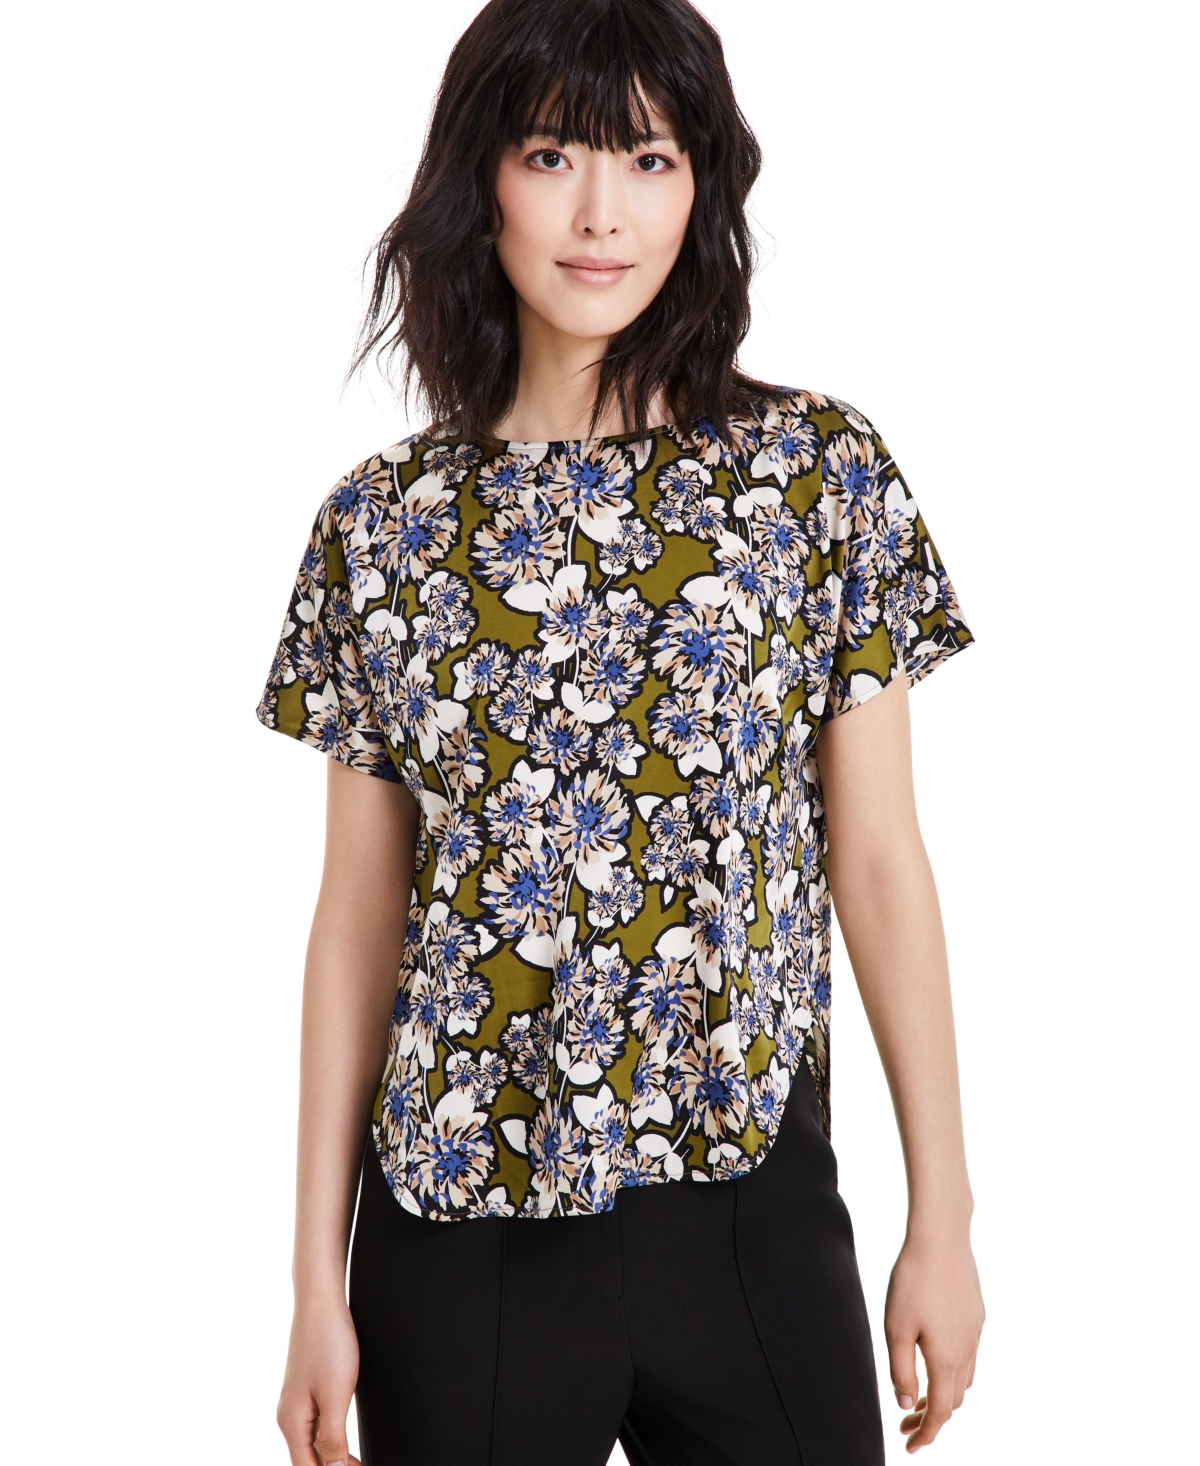 Women's Pull-On Floral Short-Sleeve Top - Blue Jay/Anne Black